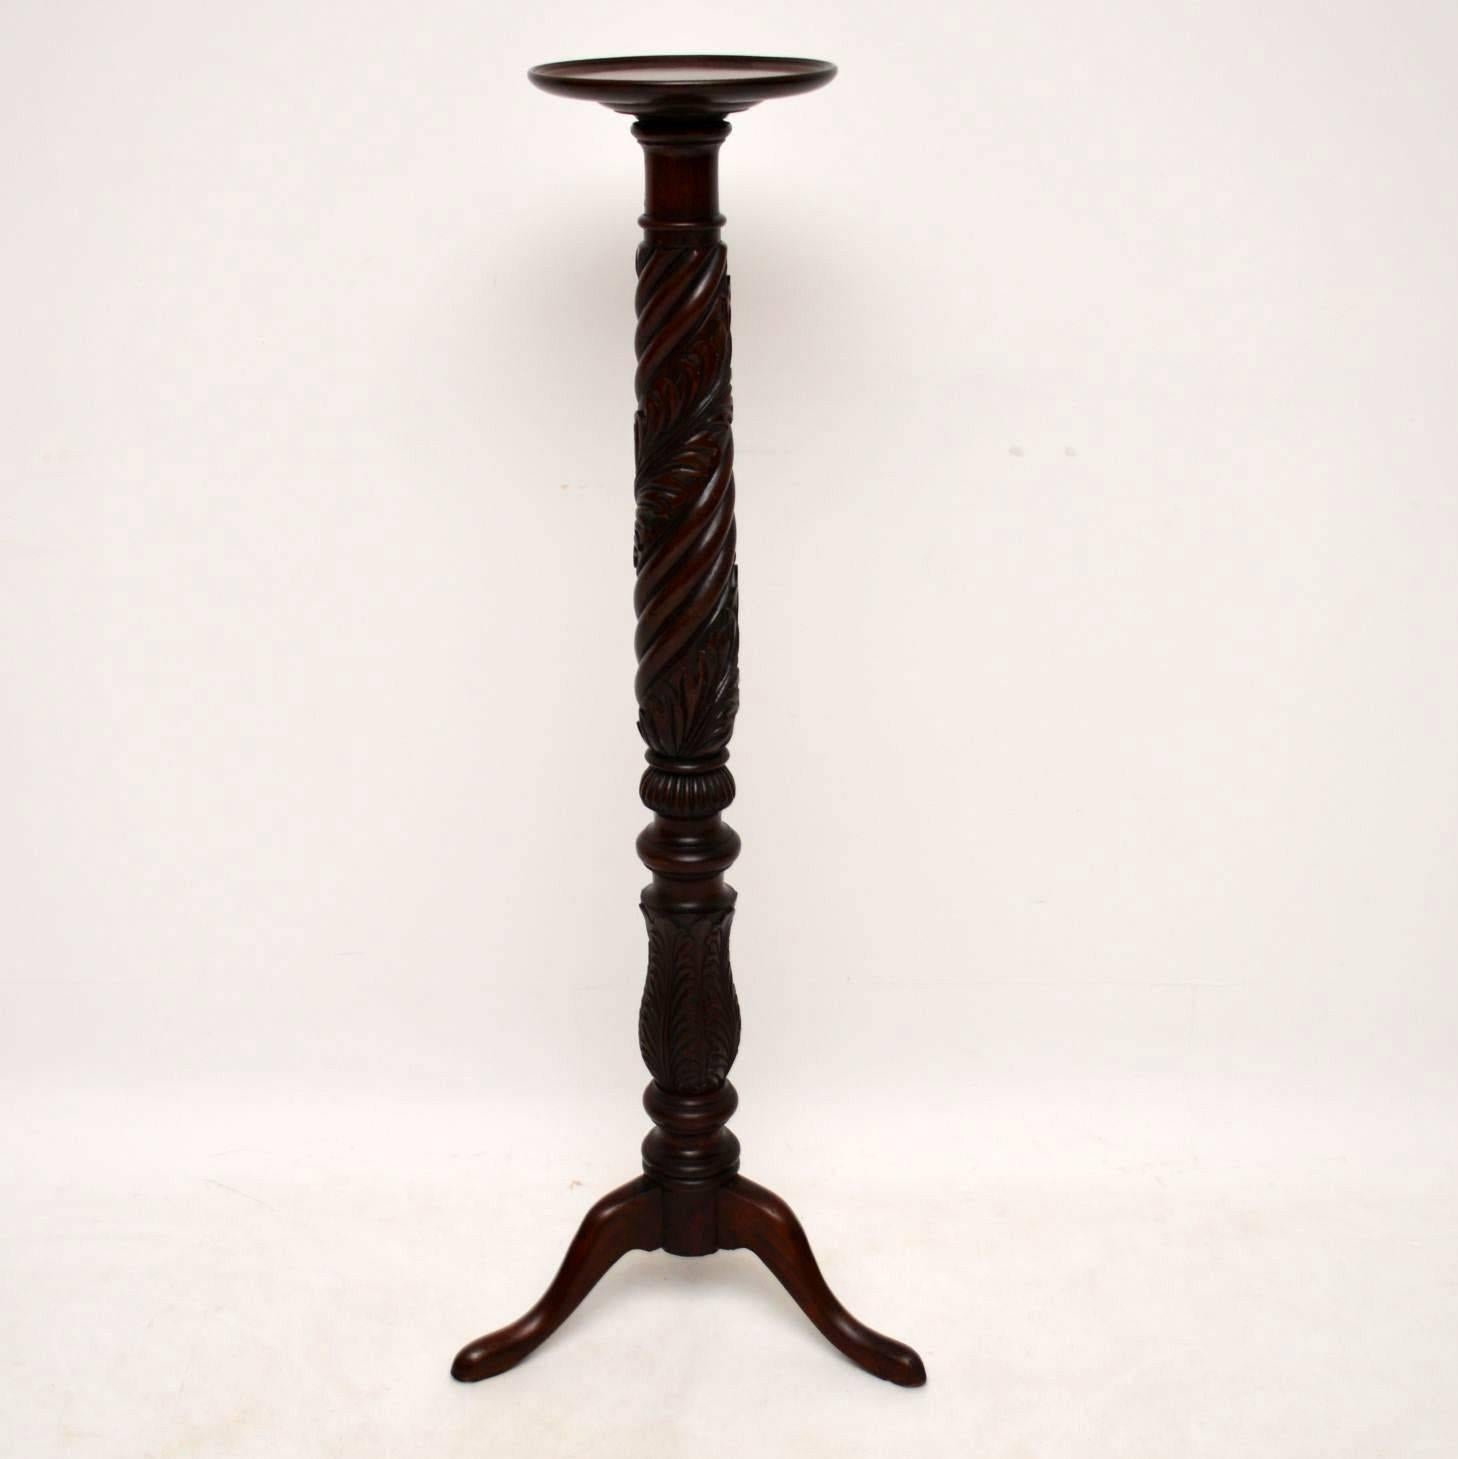 Antique solid mahogany torchere stand with abundant carvings, turnings and designs all down the stem, sitting on tripod legs. It's in excellent original condition and I would date it to around the 1840 period.

Measures: Width 18", 46